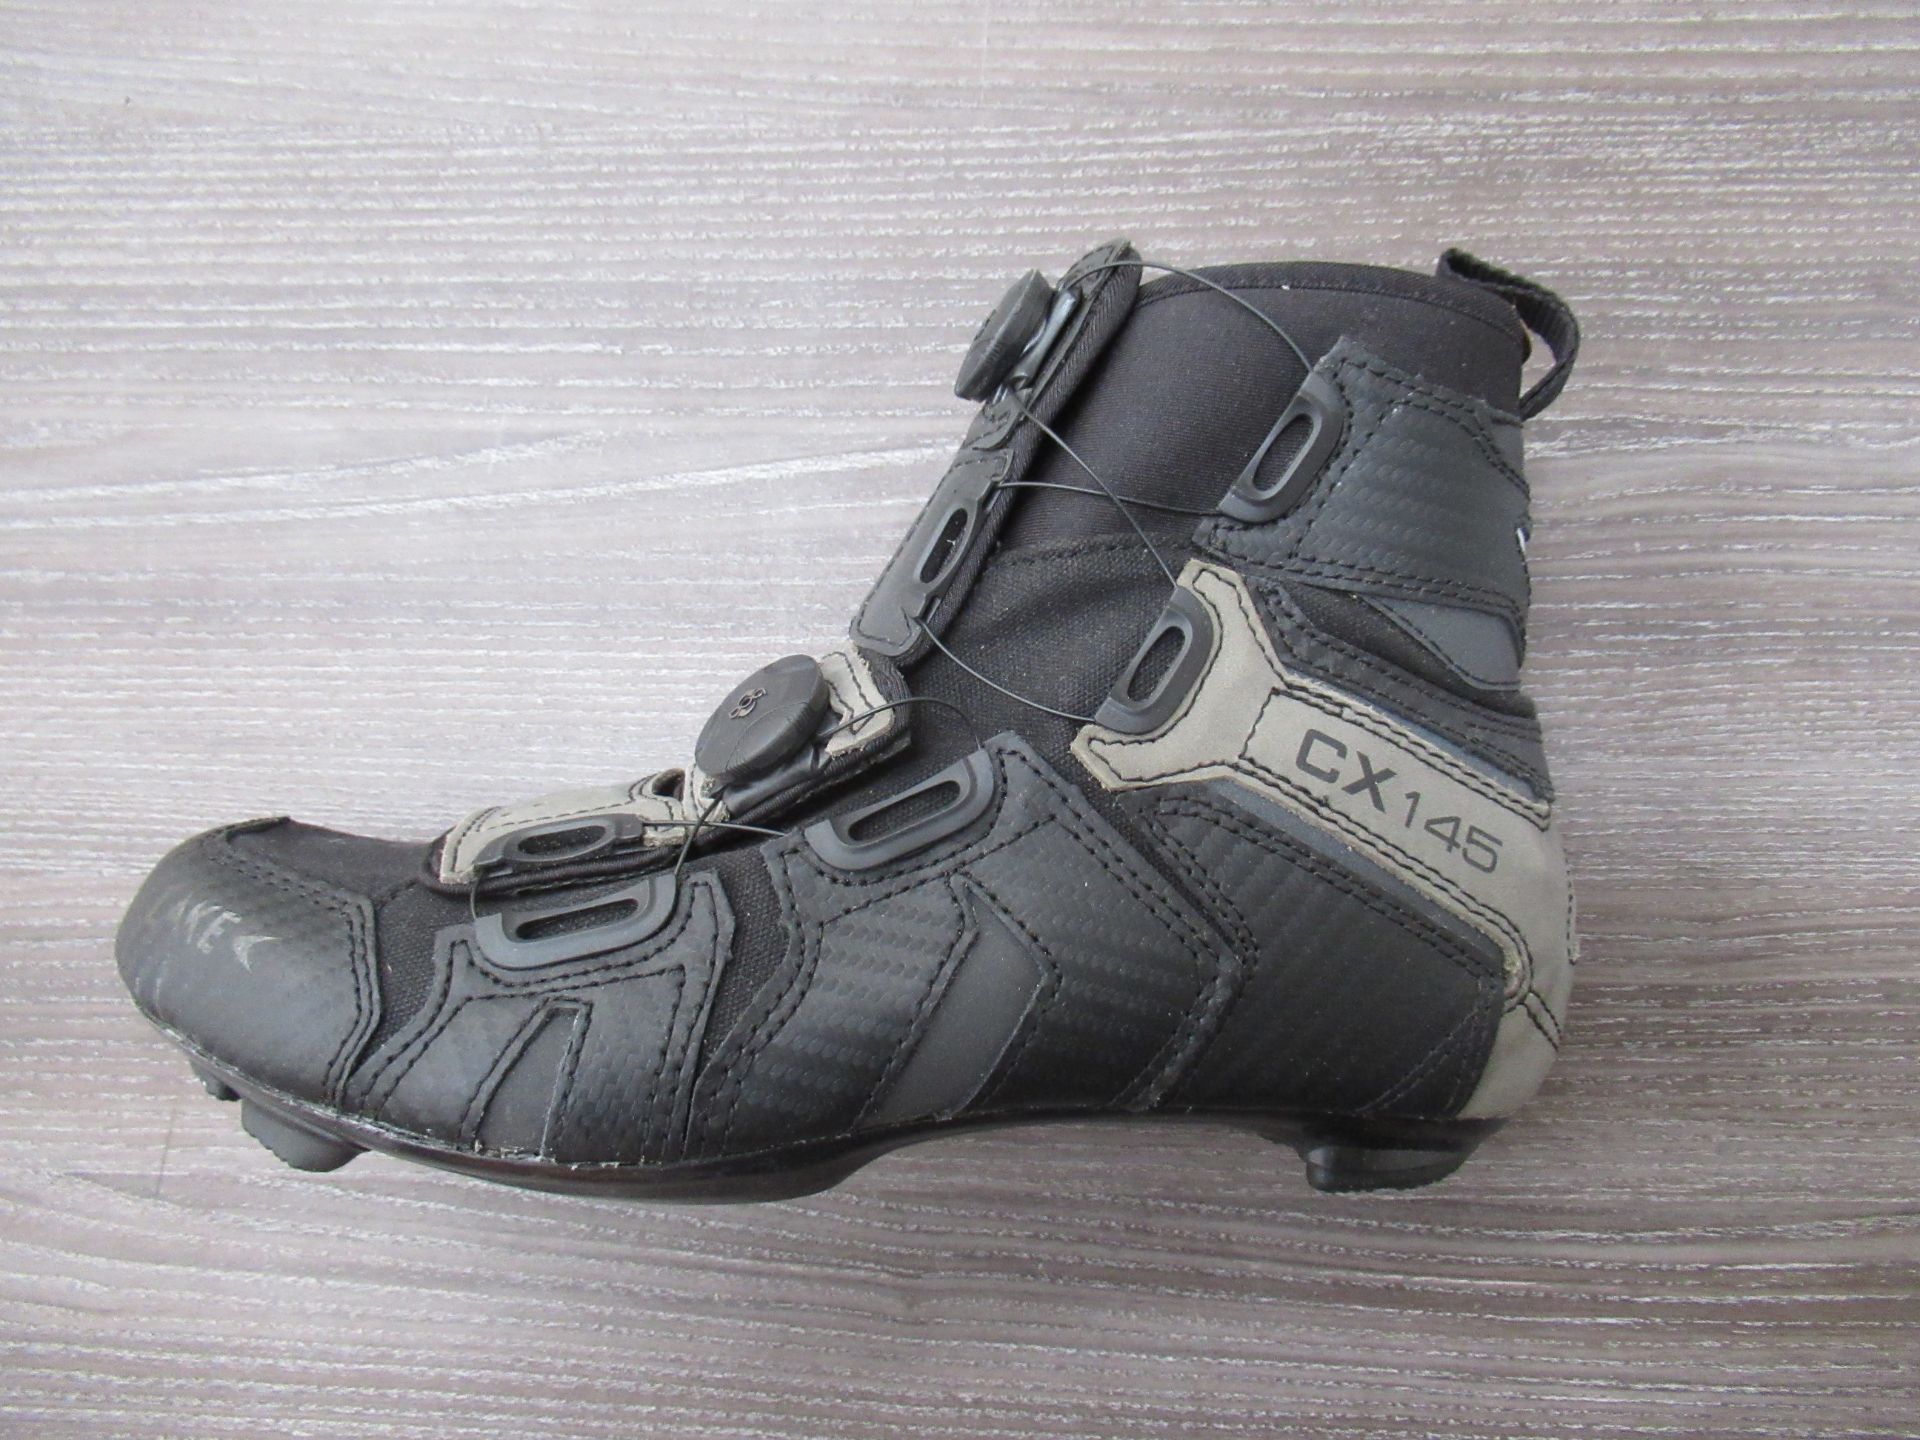 Pair of Lake CX145 cycling boots (black/grey) - boxed EU size 41.5 (RRP£200) - Image 2 of 4